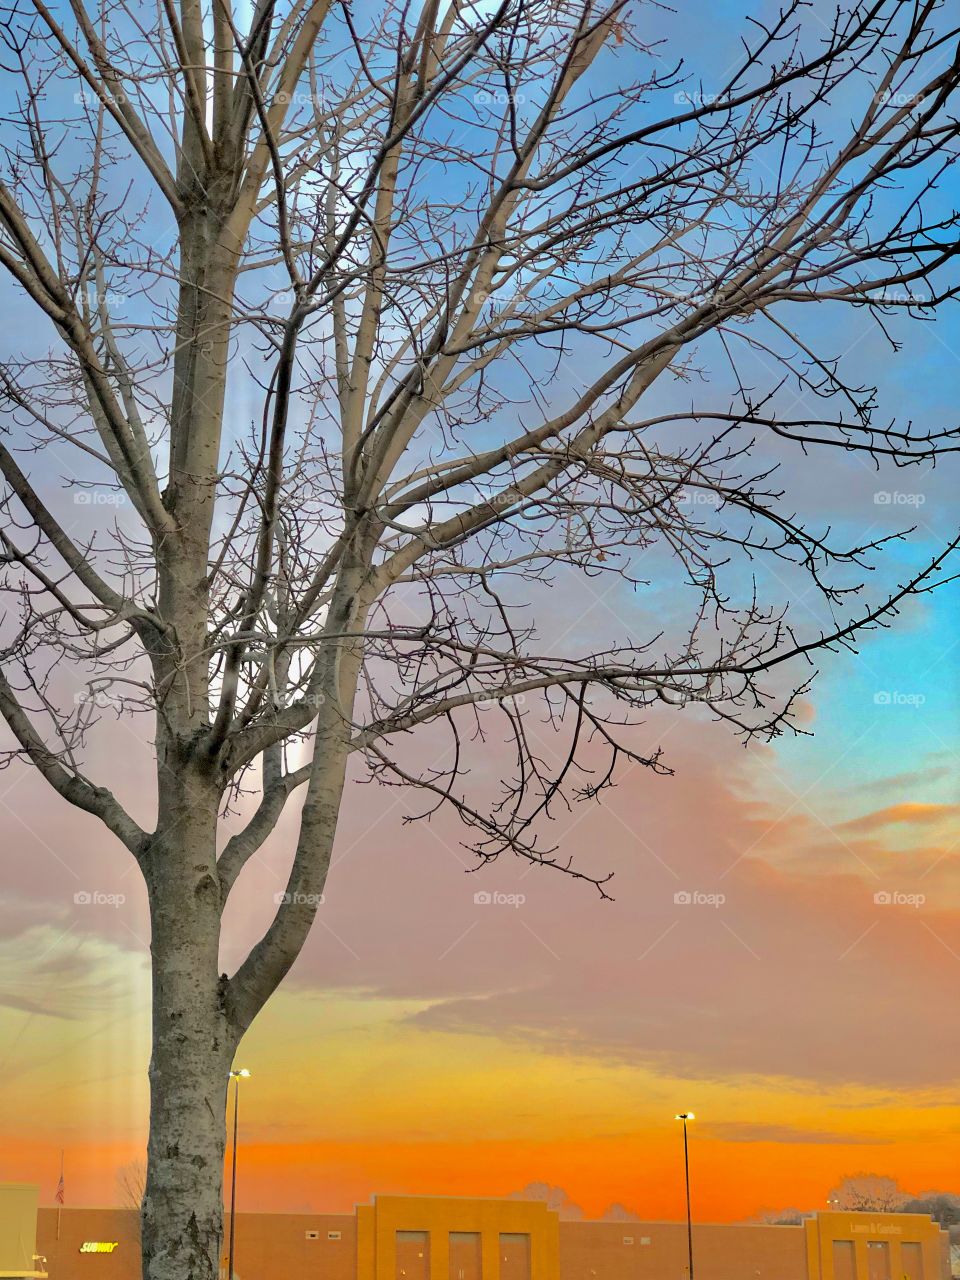 A tree with bare branches is in the foreground with a colorful skyline in the background where the horizon merges with the front exterior of a building.